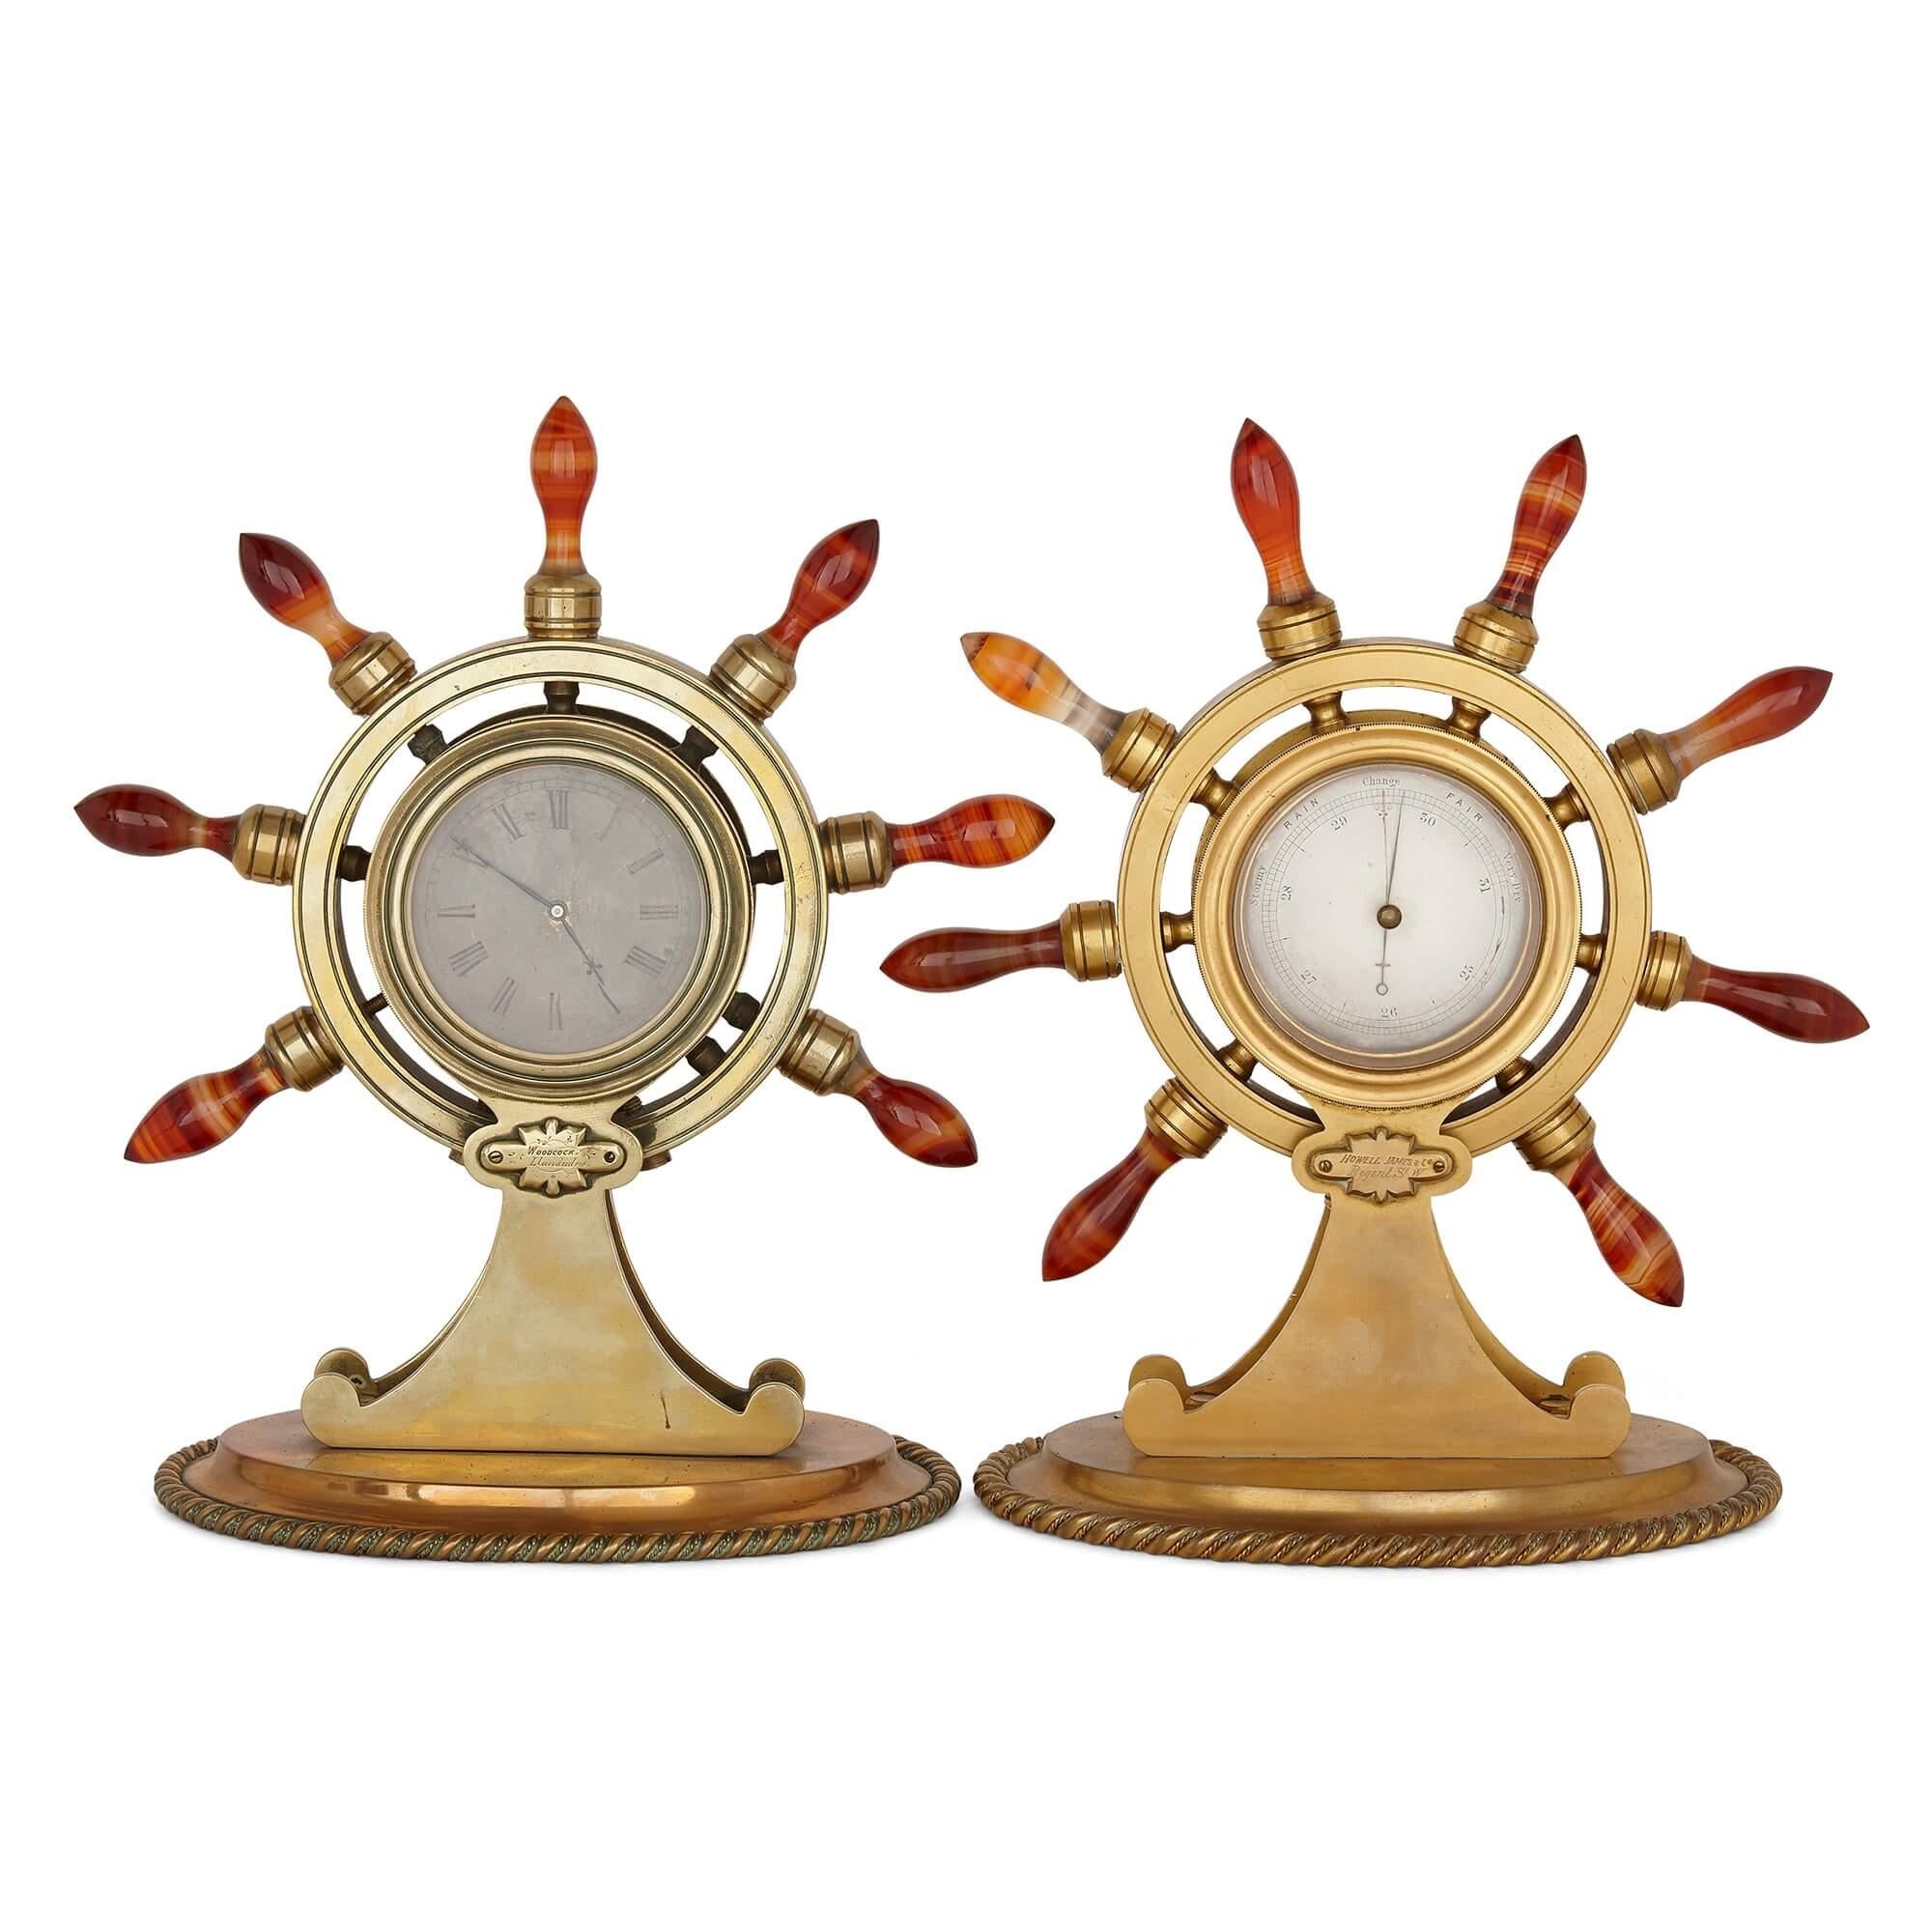 Antique Victorian nautical gilt bronze clock and barometer pair
English, 19th Century
Measures: height 25 cm, width 22 cm, depth 13.5 cm

This elegant pair, comprised of a clock and a barometer, is a fine example of Victorian decorative art. The